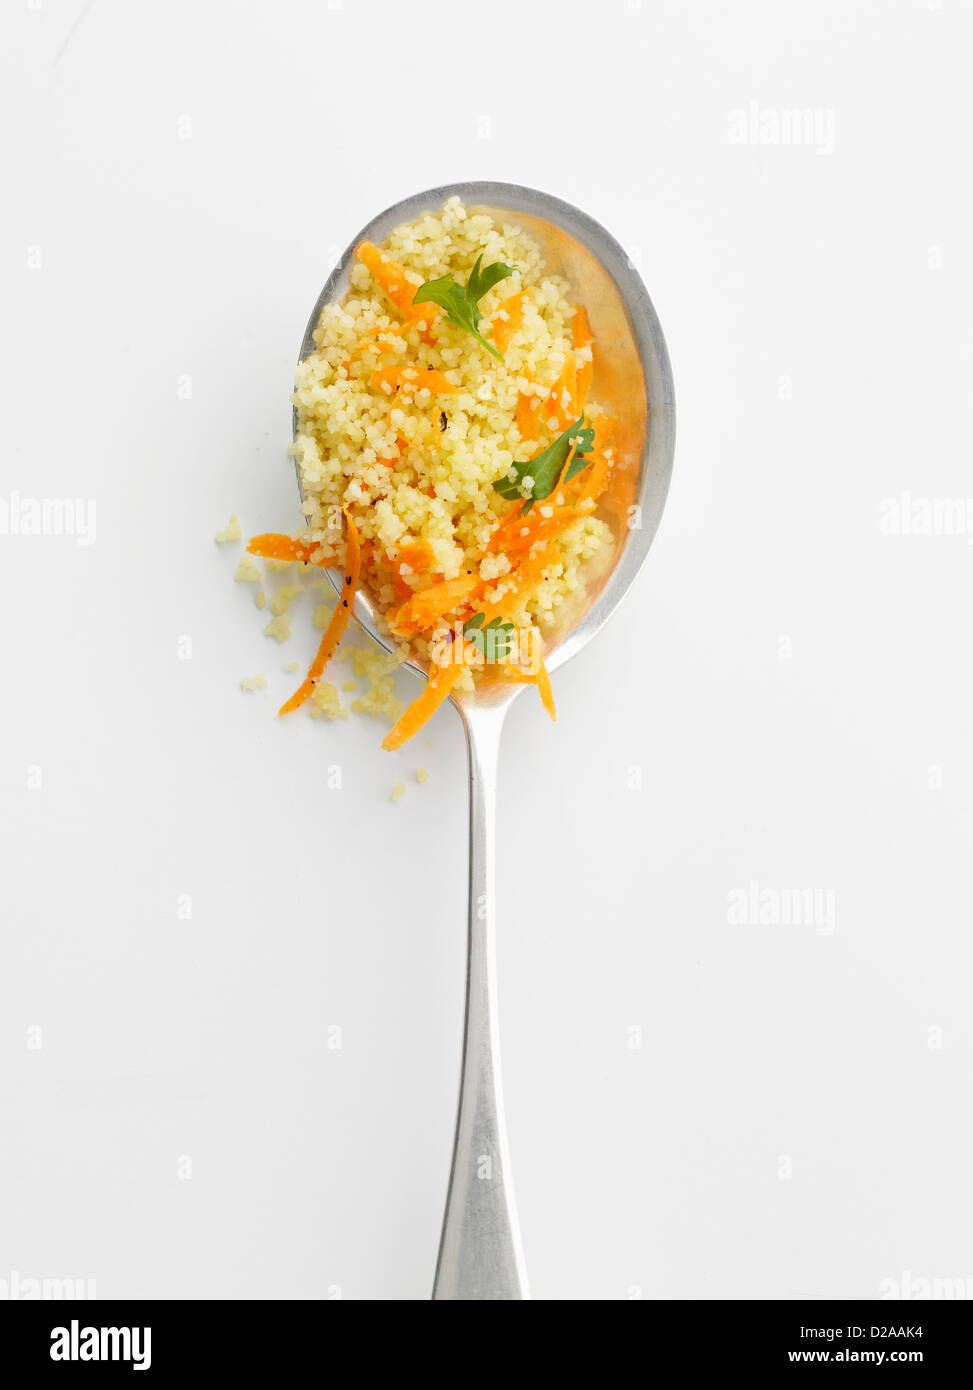 Spoonful of couscous and herbs Stock Photo